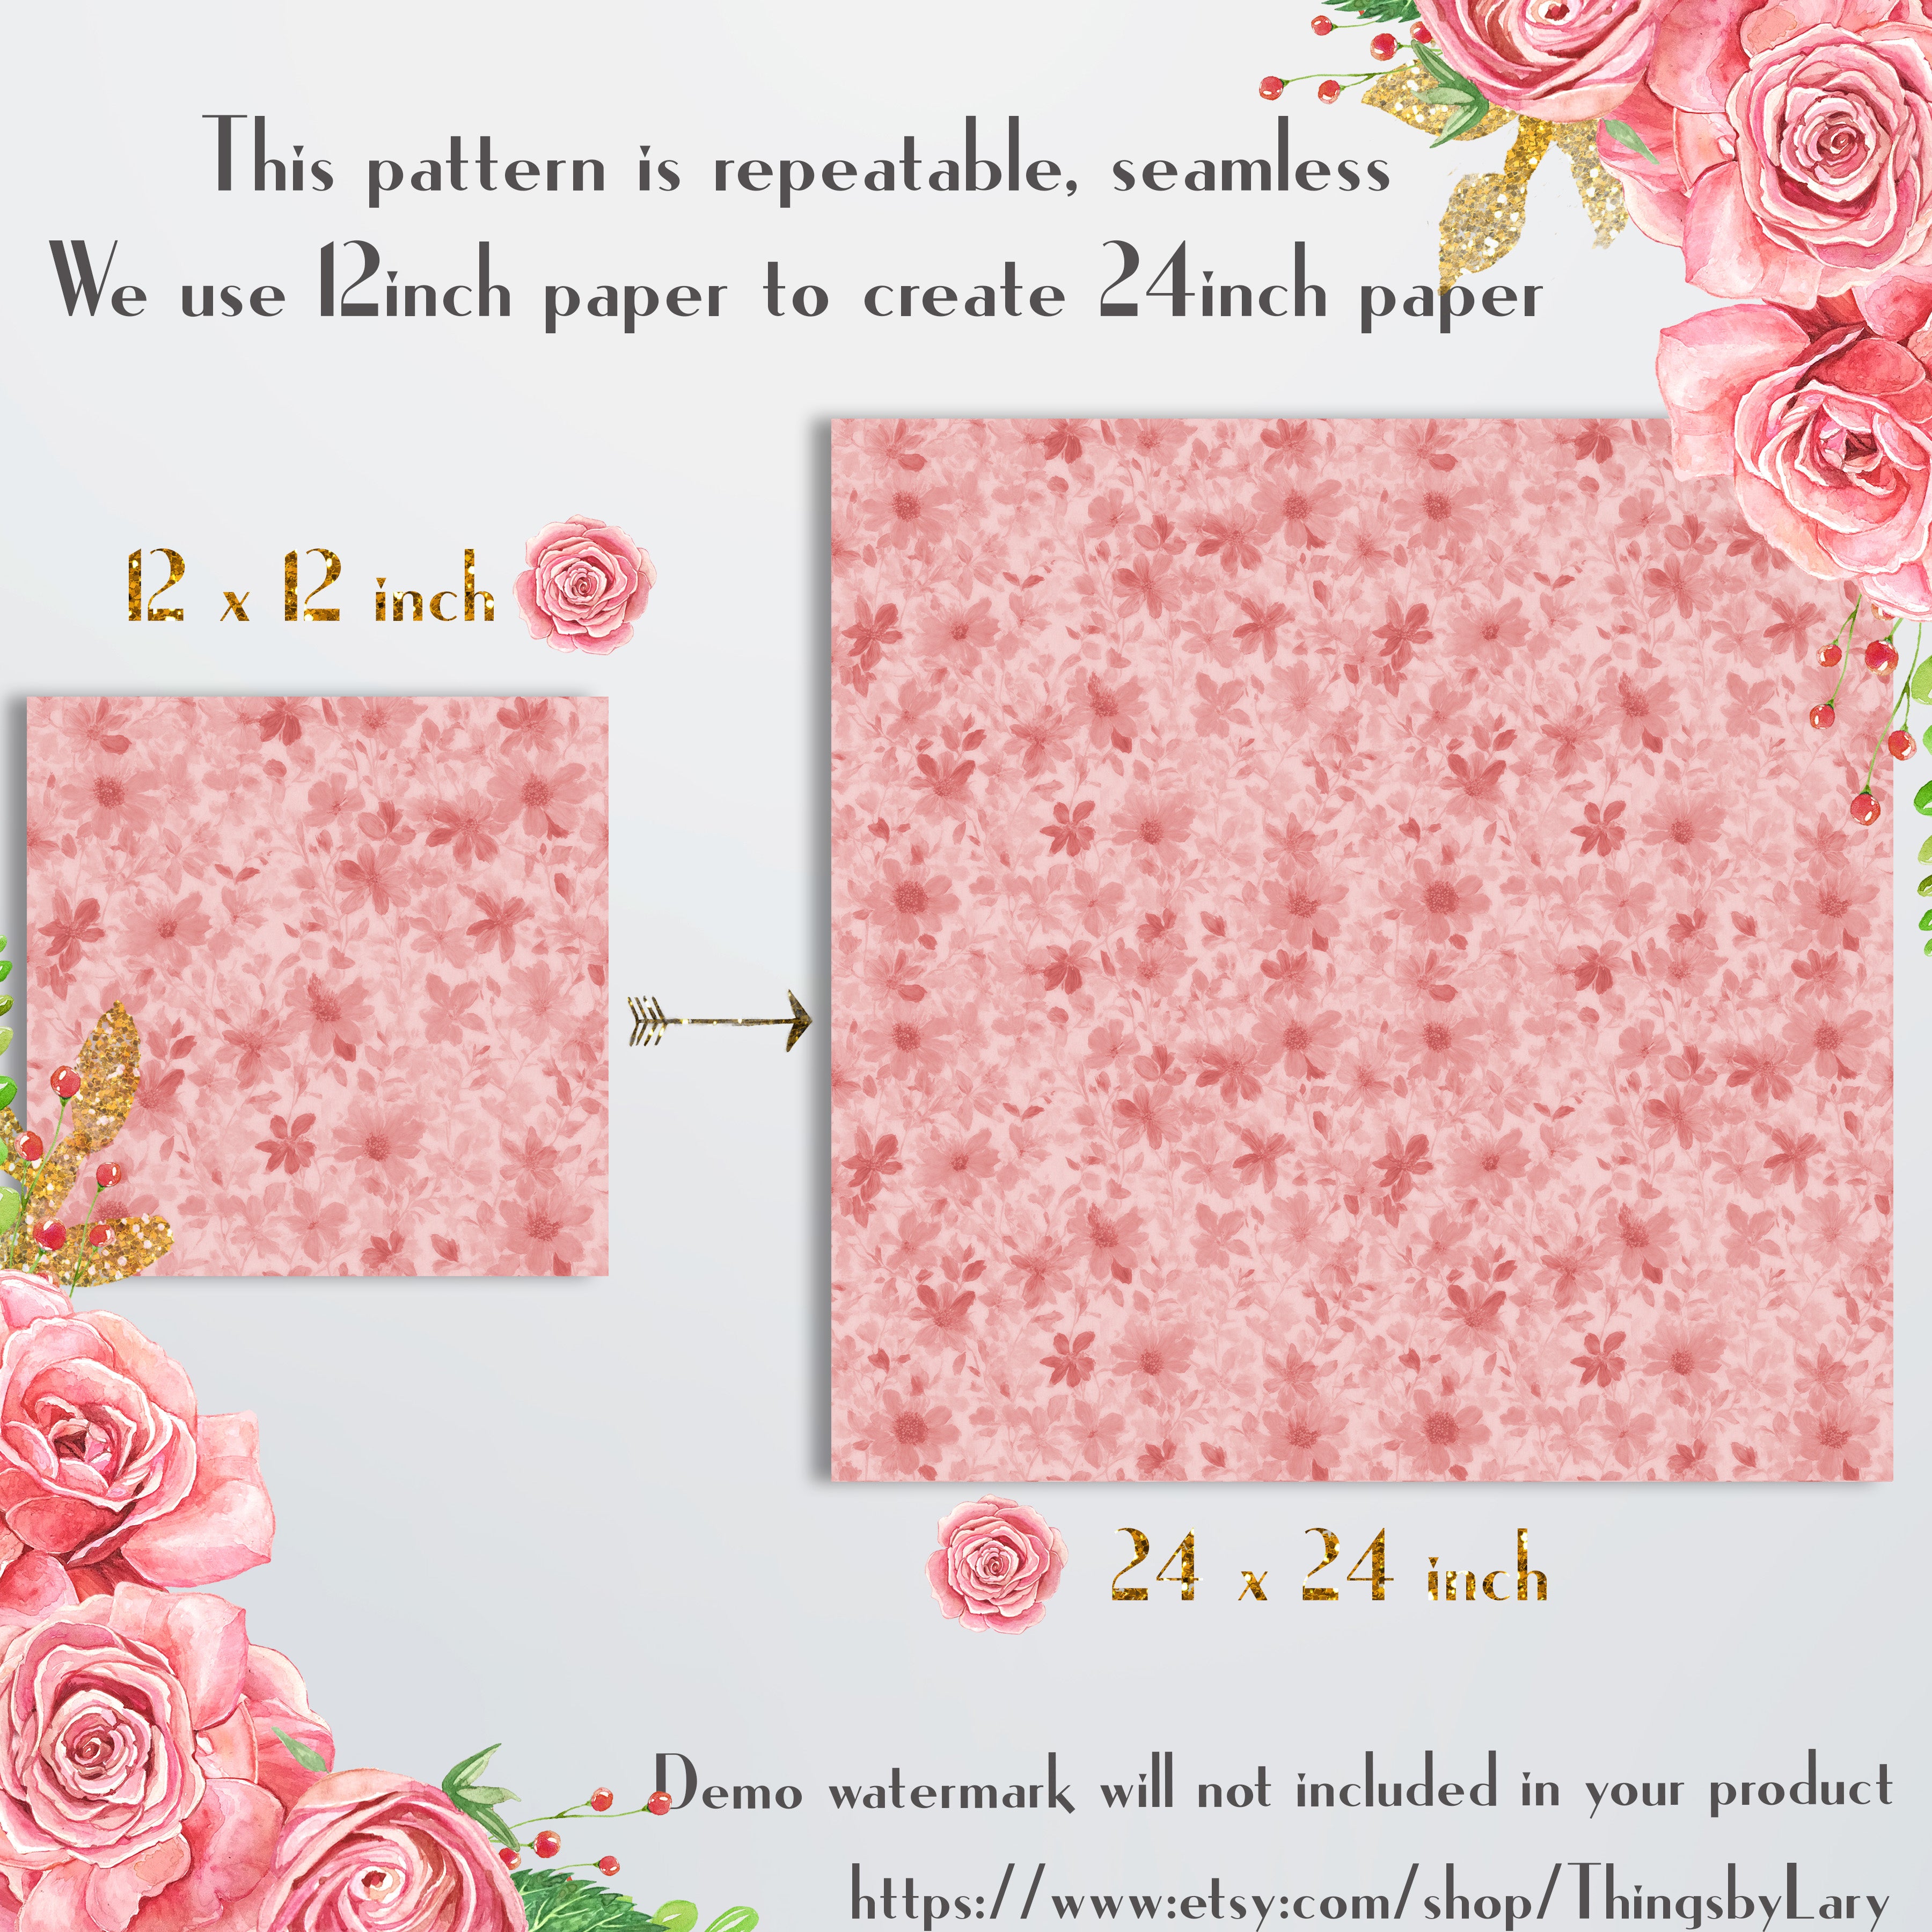 100 Seamless Shabby Chic Floral Fabric Digital Papers